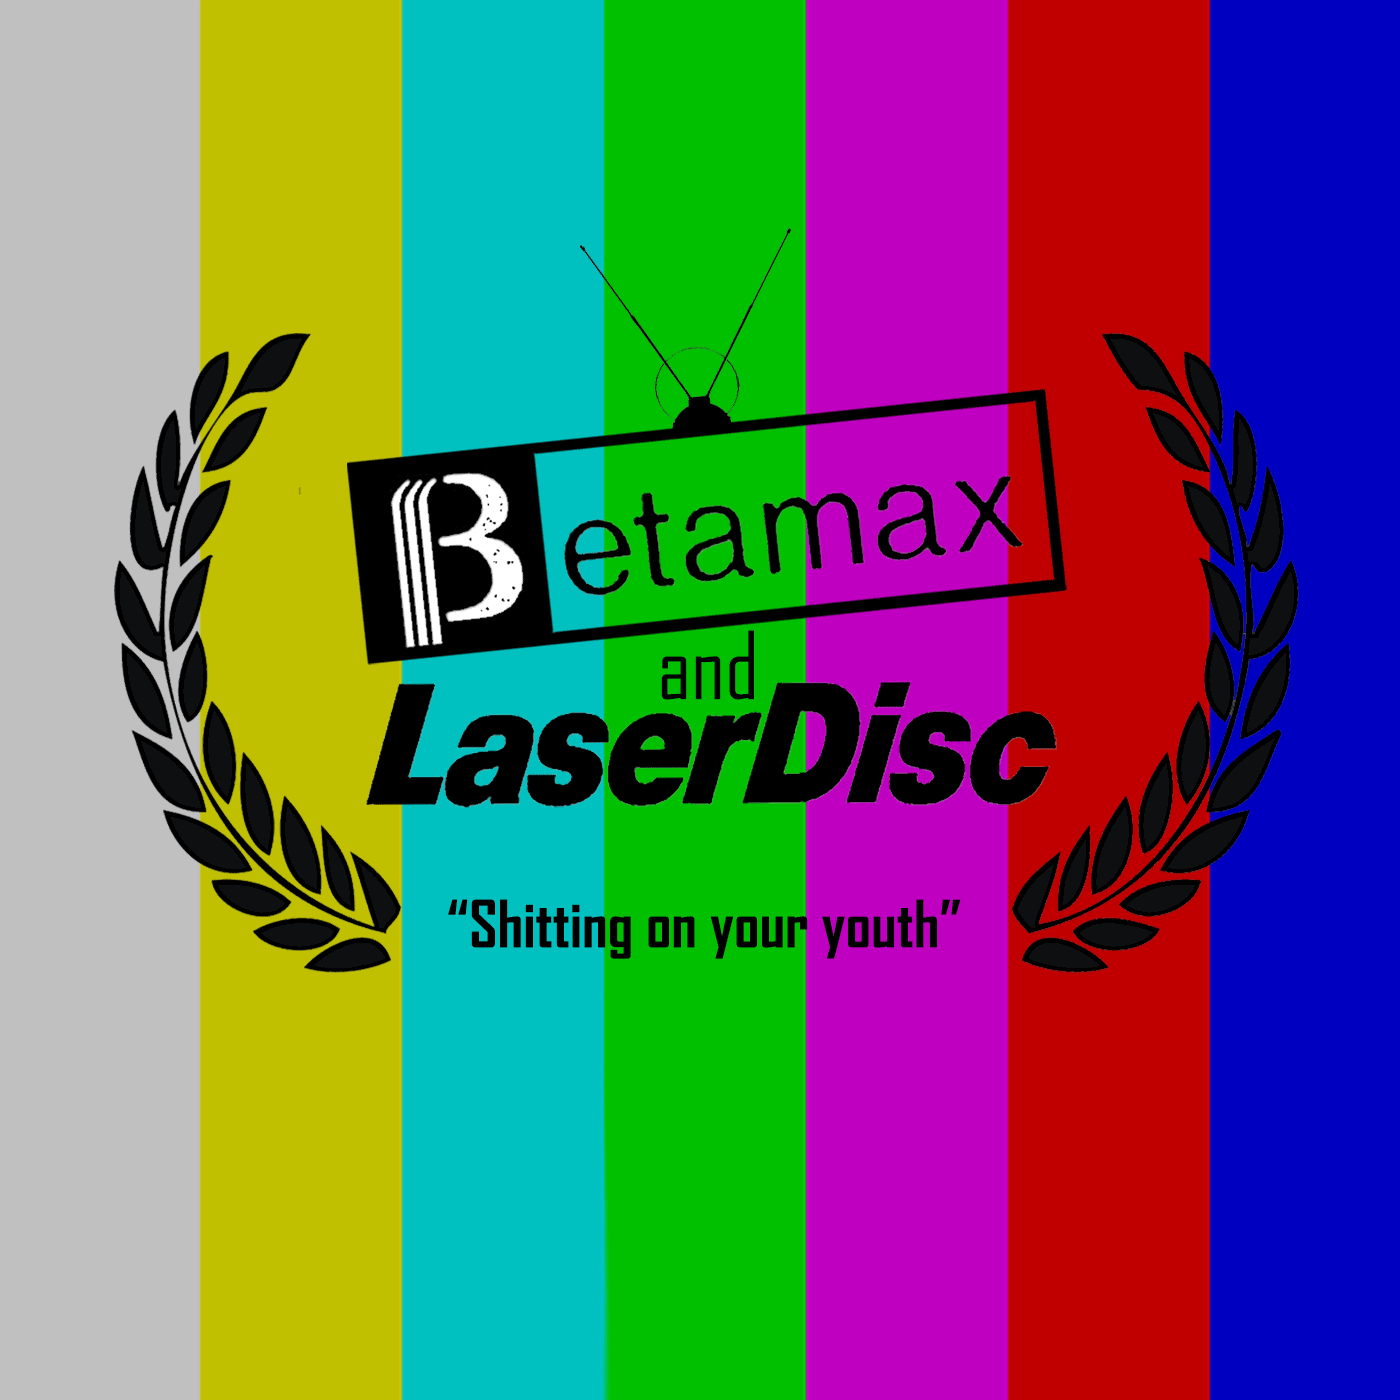 Betamax & Laserdisc #8 | The Television & Film Podcast from The Unheard Nerd